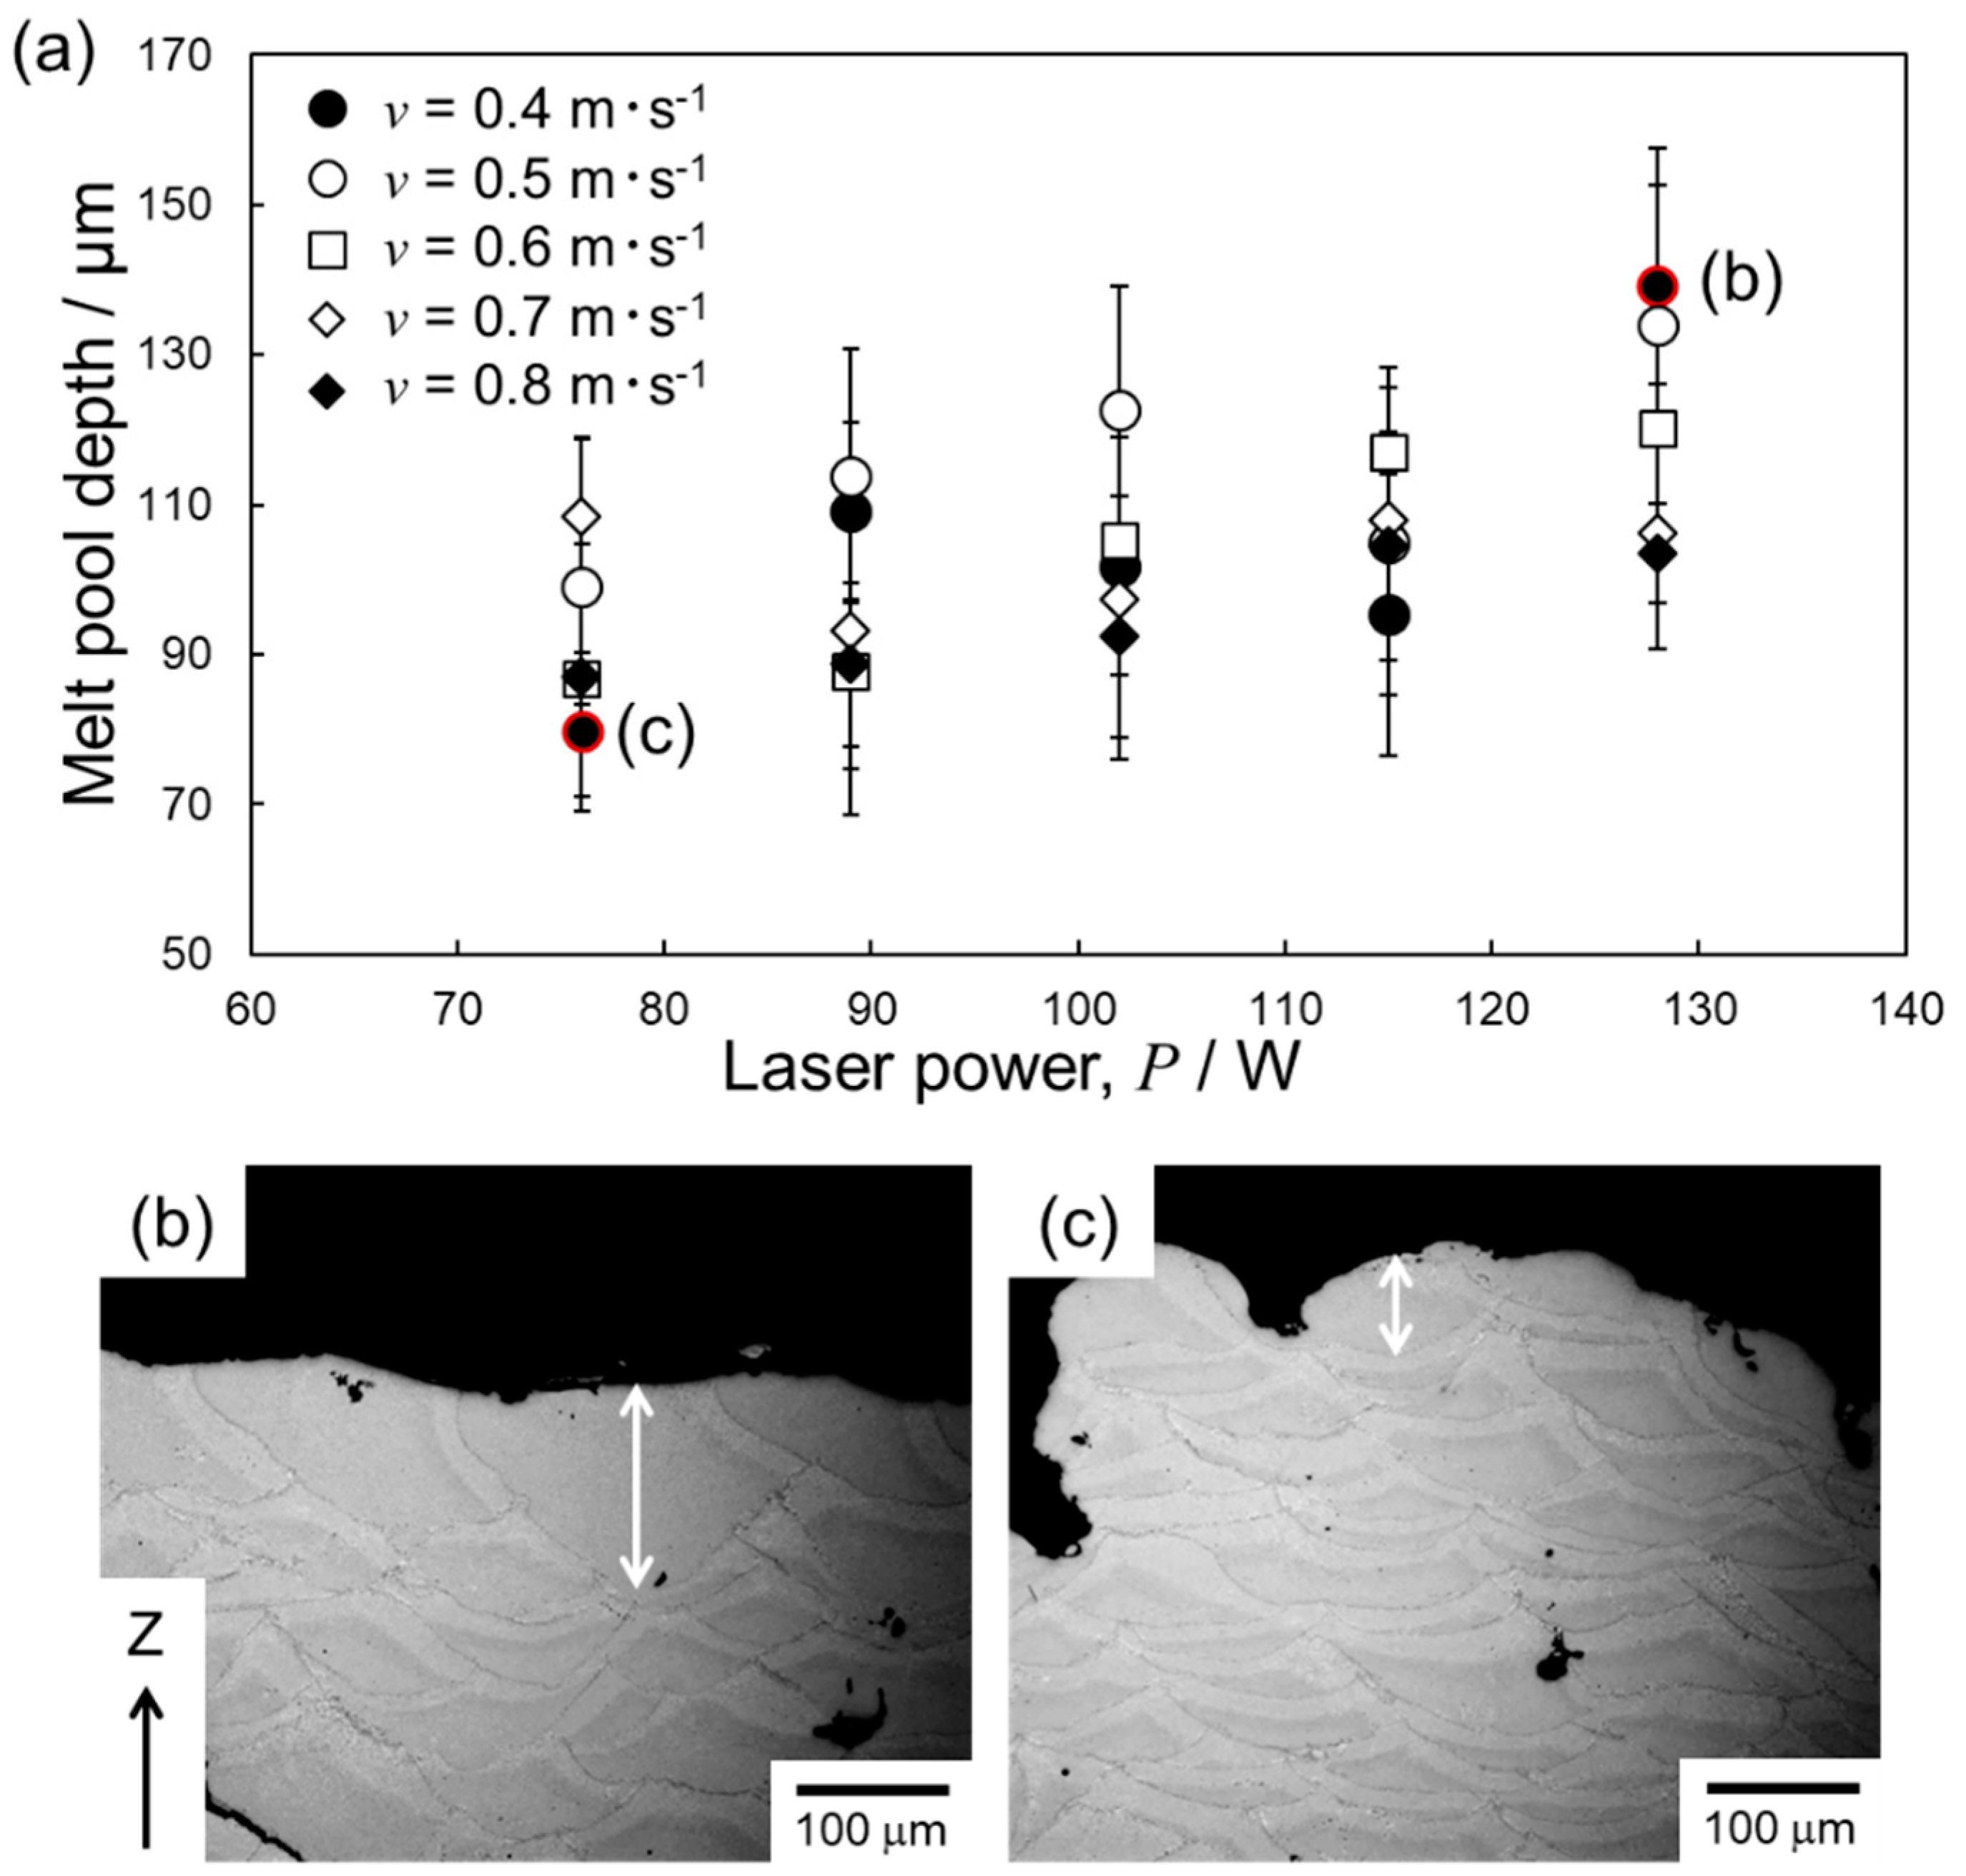 Crystals Free Full Text Processability And Optimization Of Laser Parameters For Densification Of Hypereutectic Al Fe Binary Alloy Manufactured By Laser Powder Bed Fusion Html